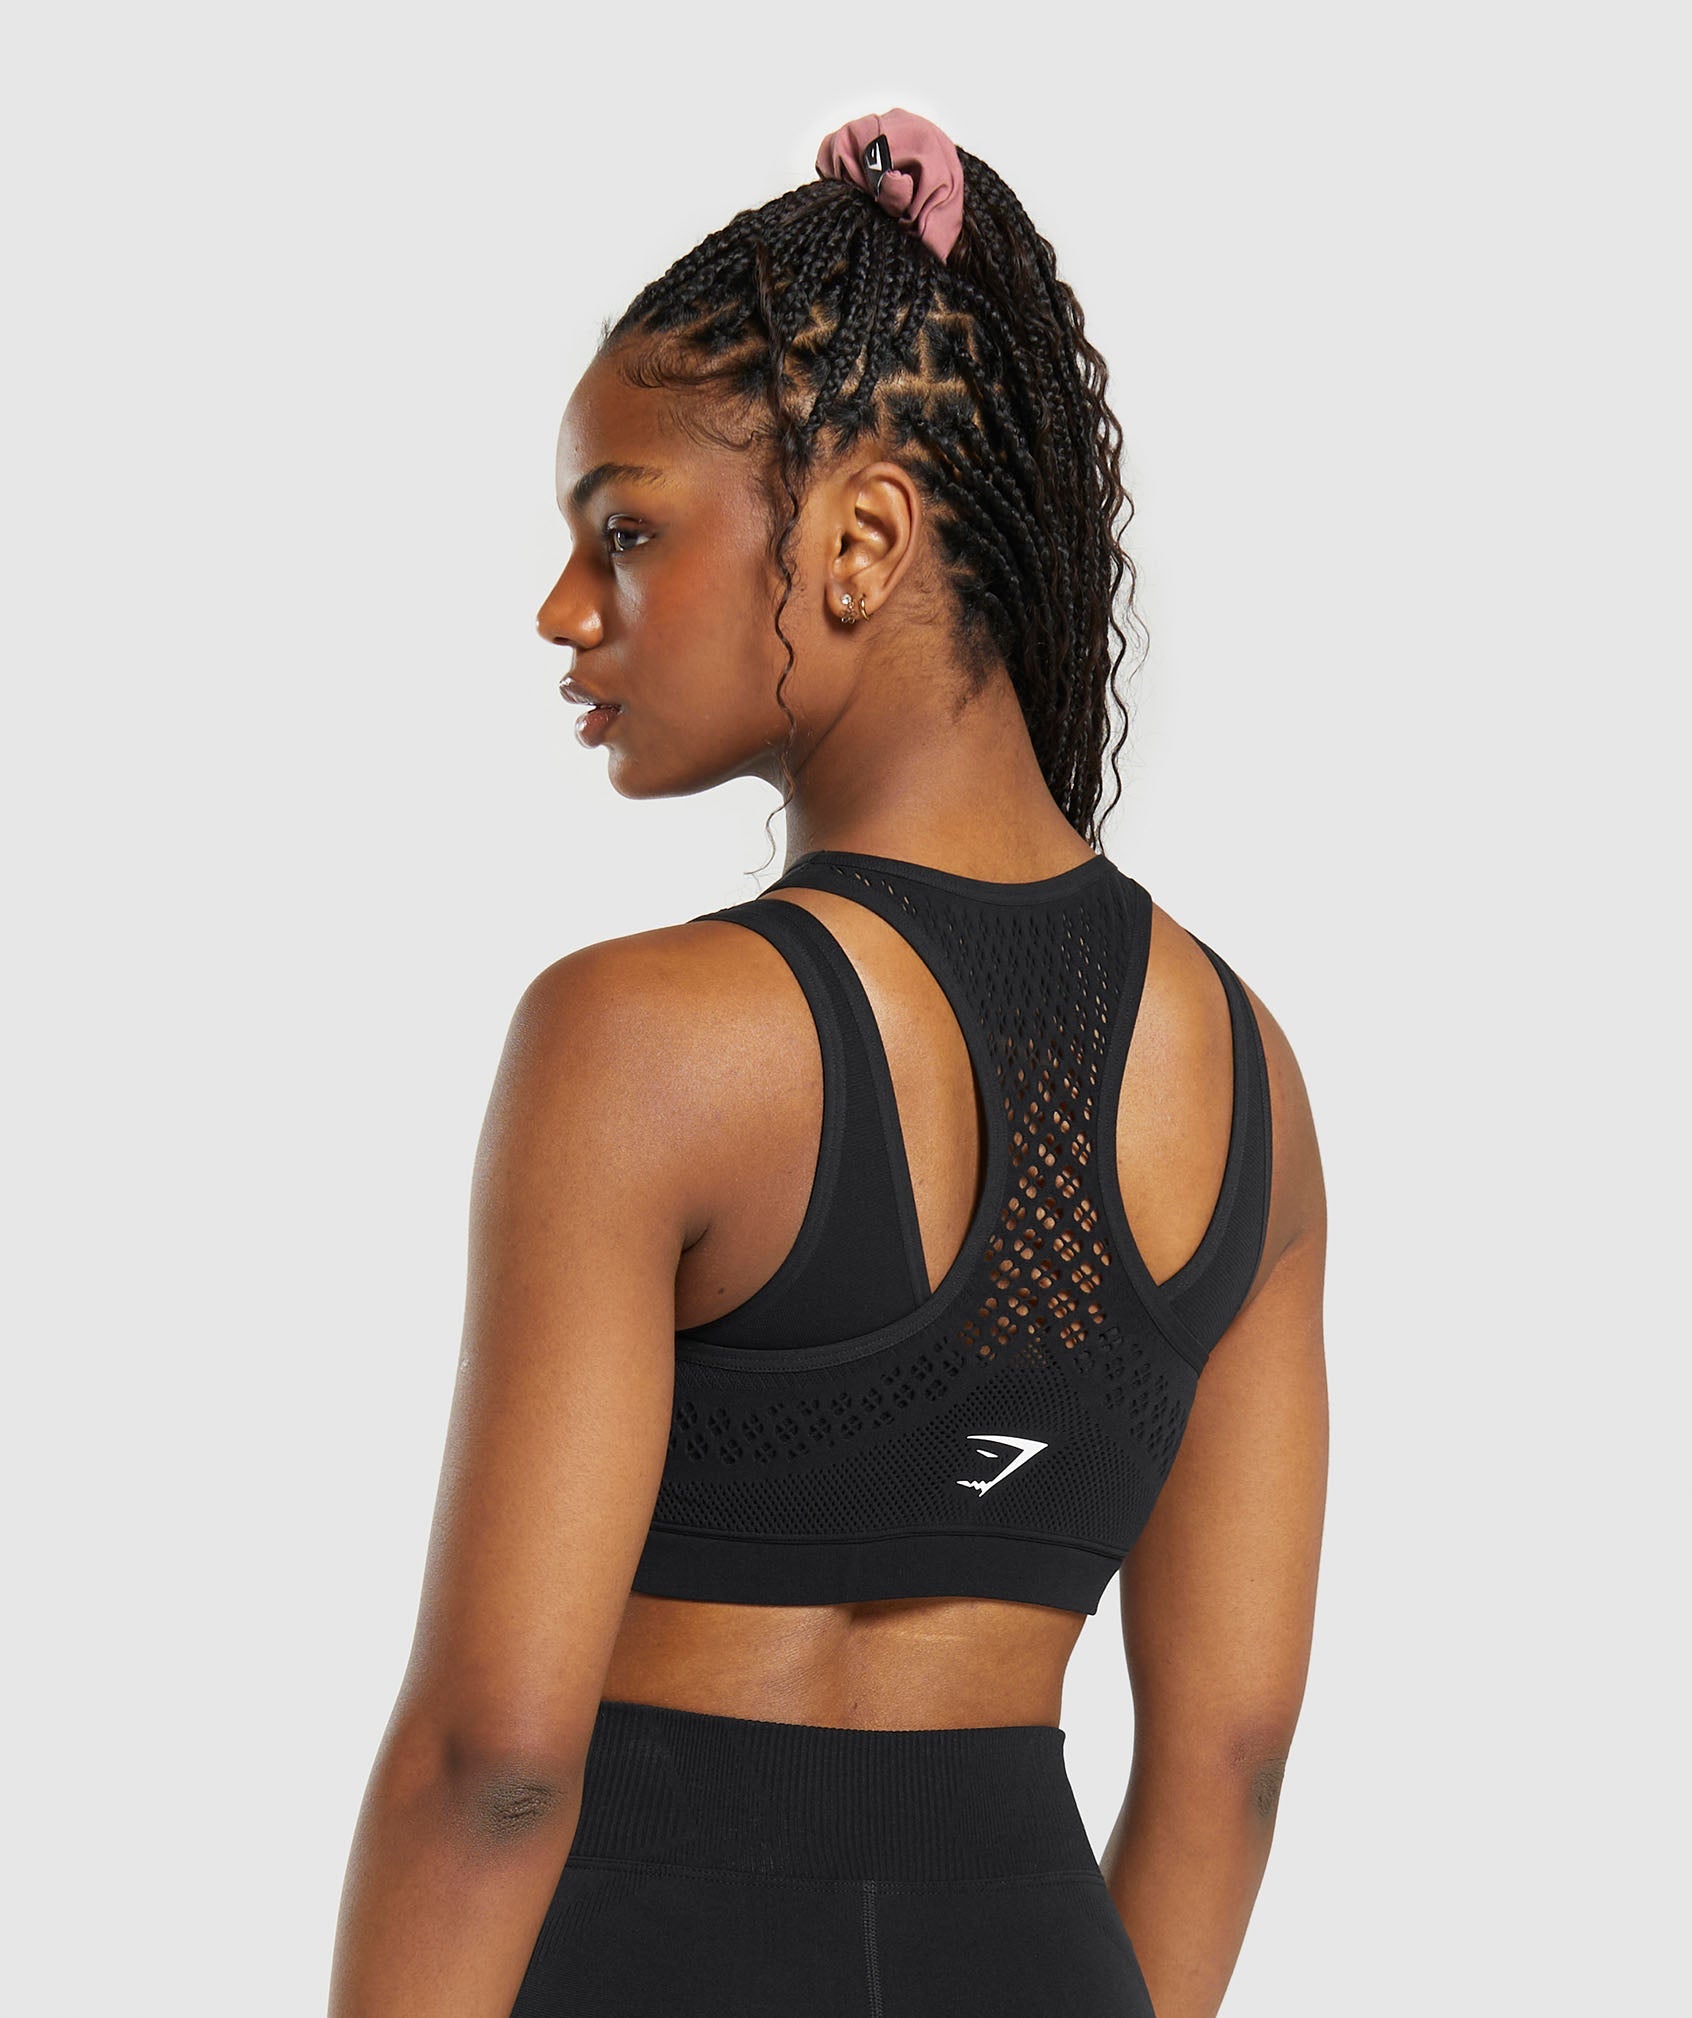 BHRIWRPY Women's Synthetic Padded Strappy Sports Activewear